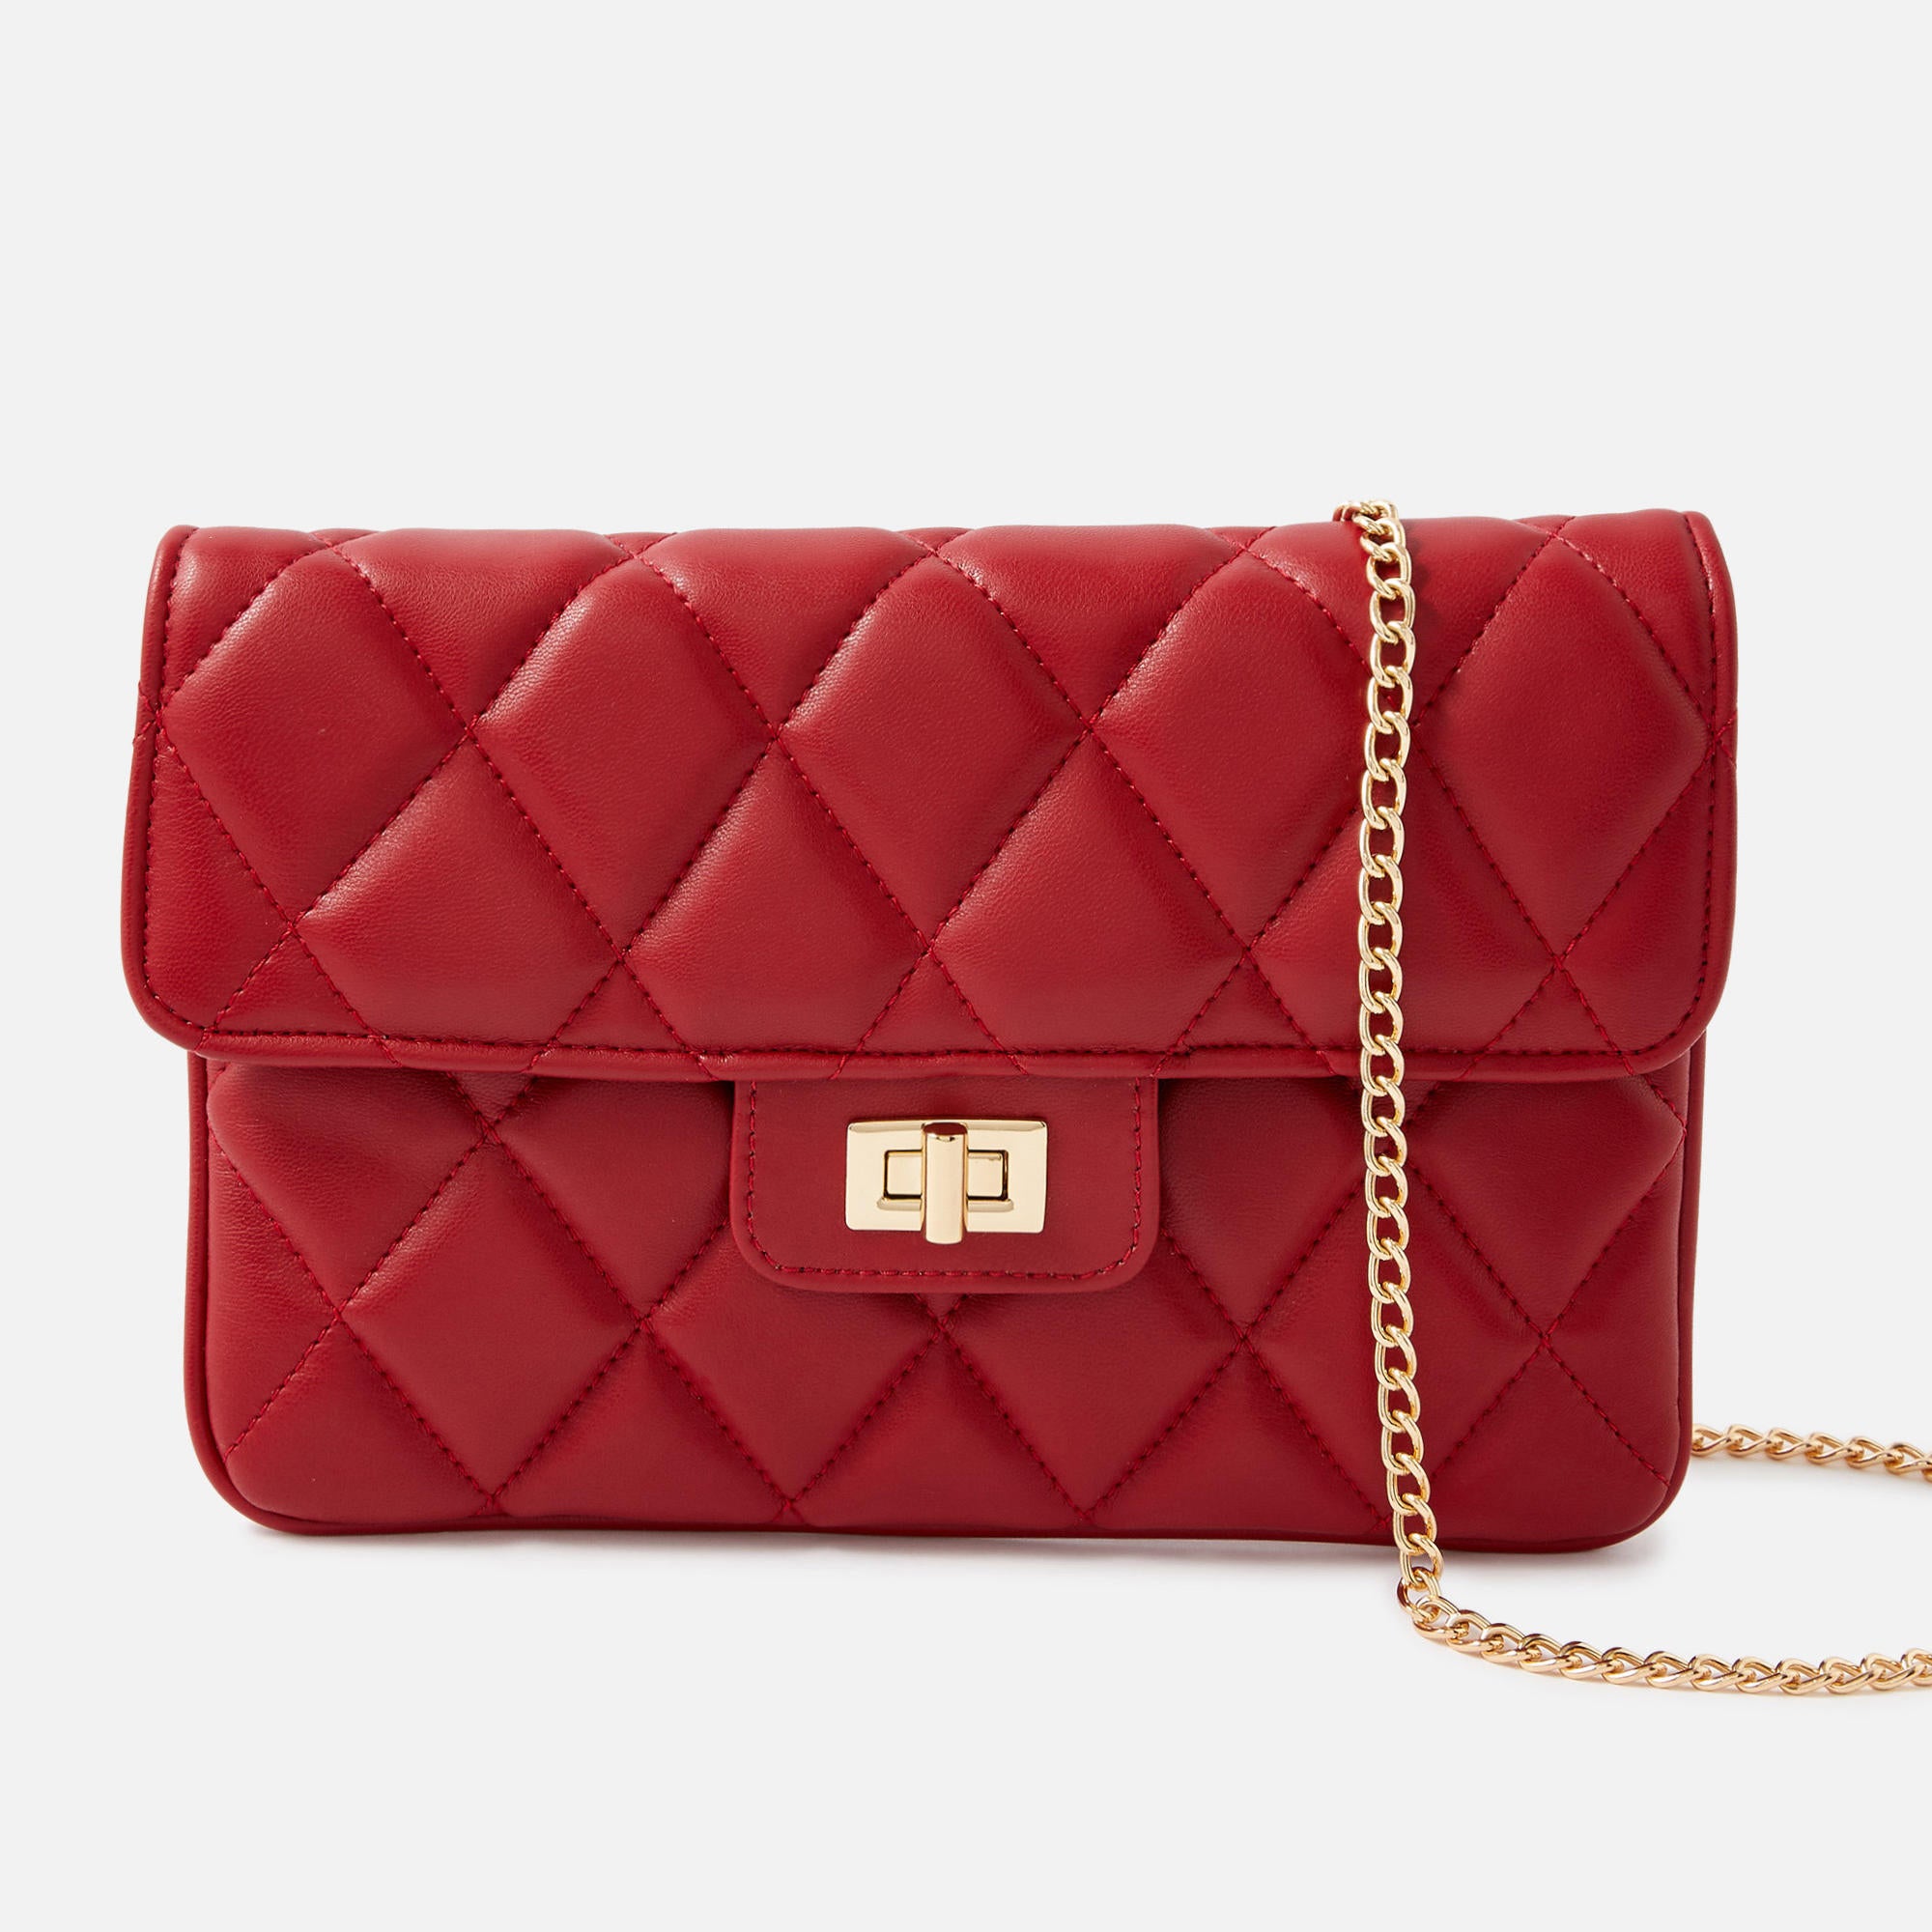 Buying Your First Chanel Bag That You'll Love - IT Girl Luxury